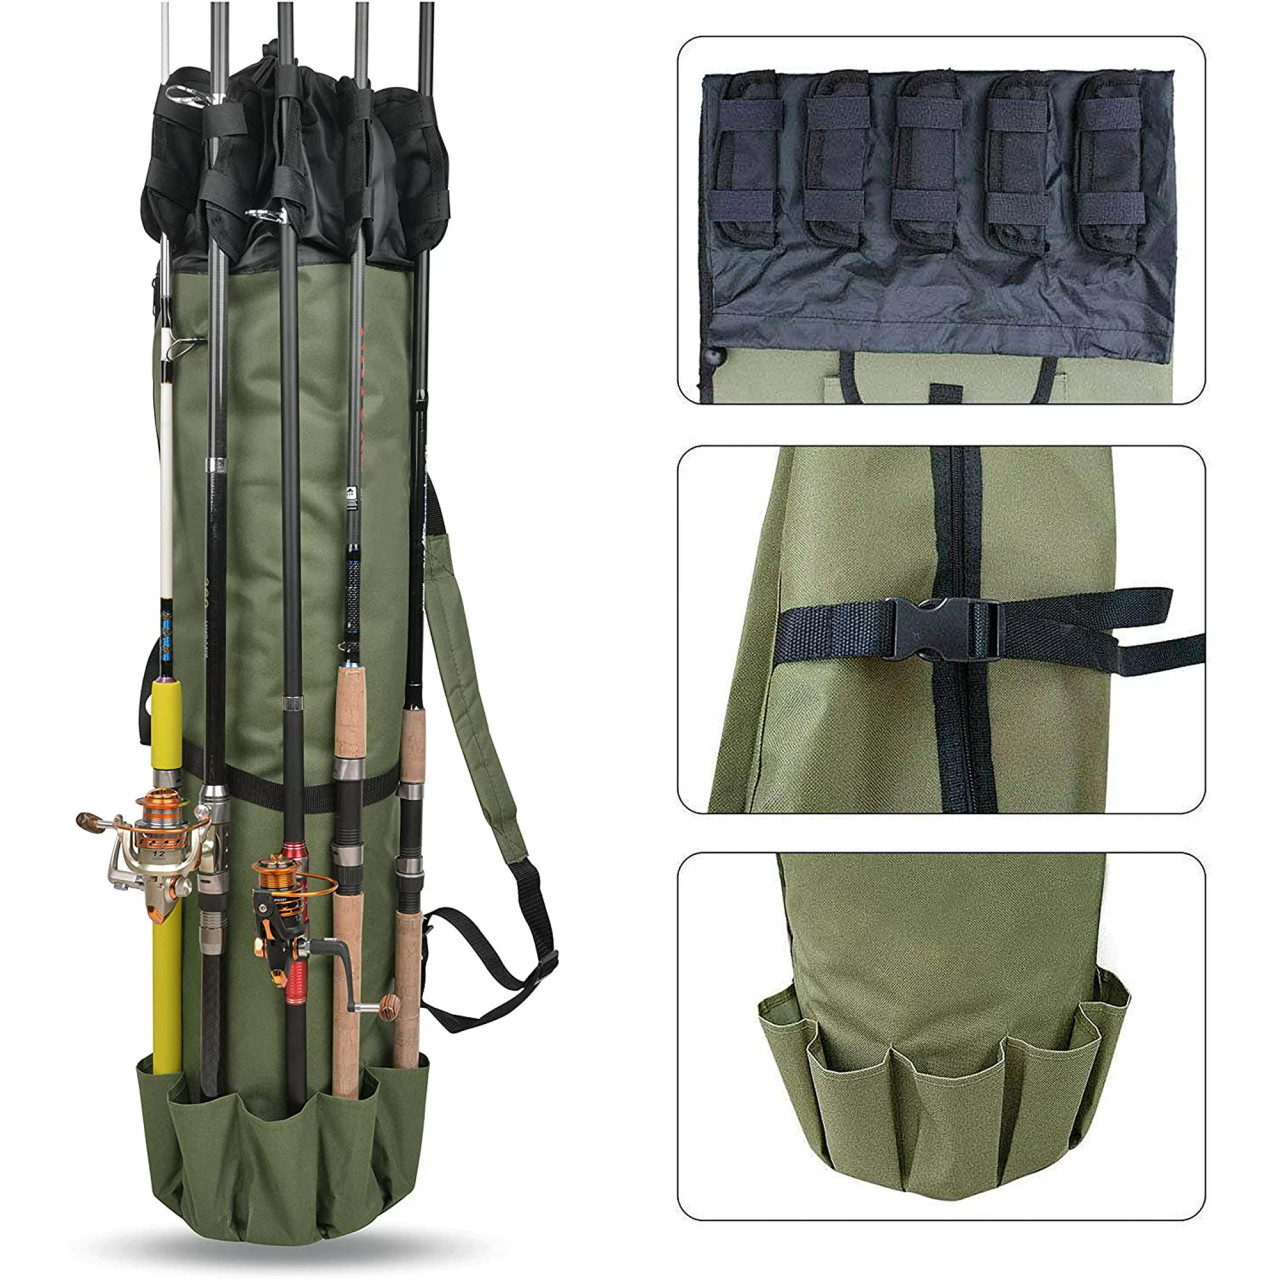 Sougayilang Fishing Rod Bag Canvas Rod Case Organizer Pole Storage Bag Fishing Rod and Reel Carrier Organizer for Travel, Gift for Father, Boyfriend